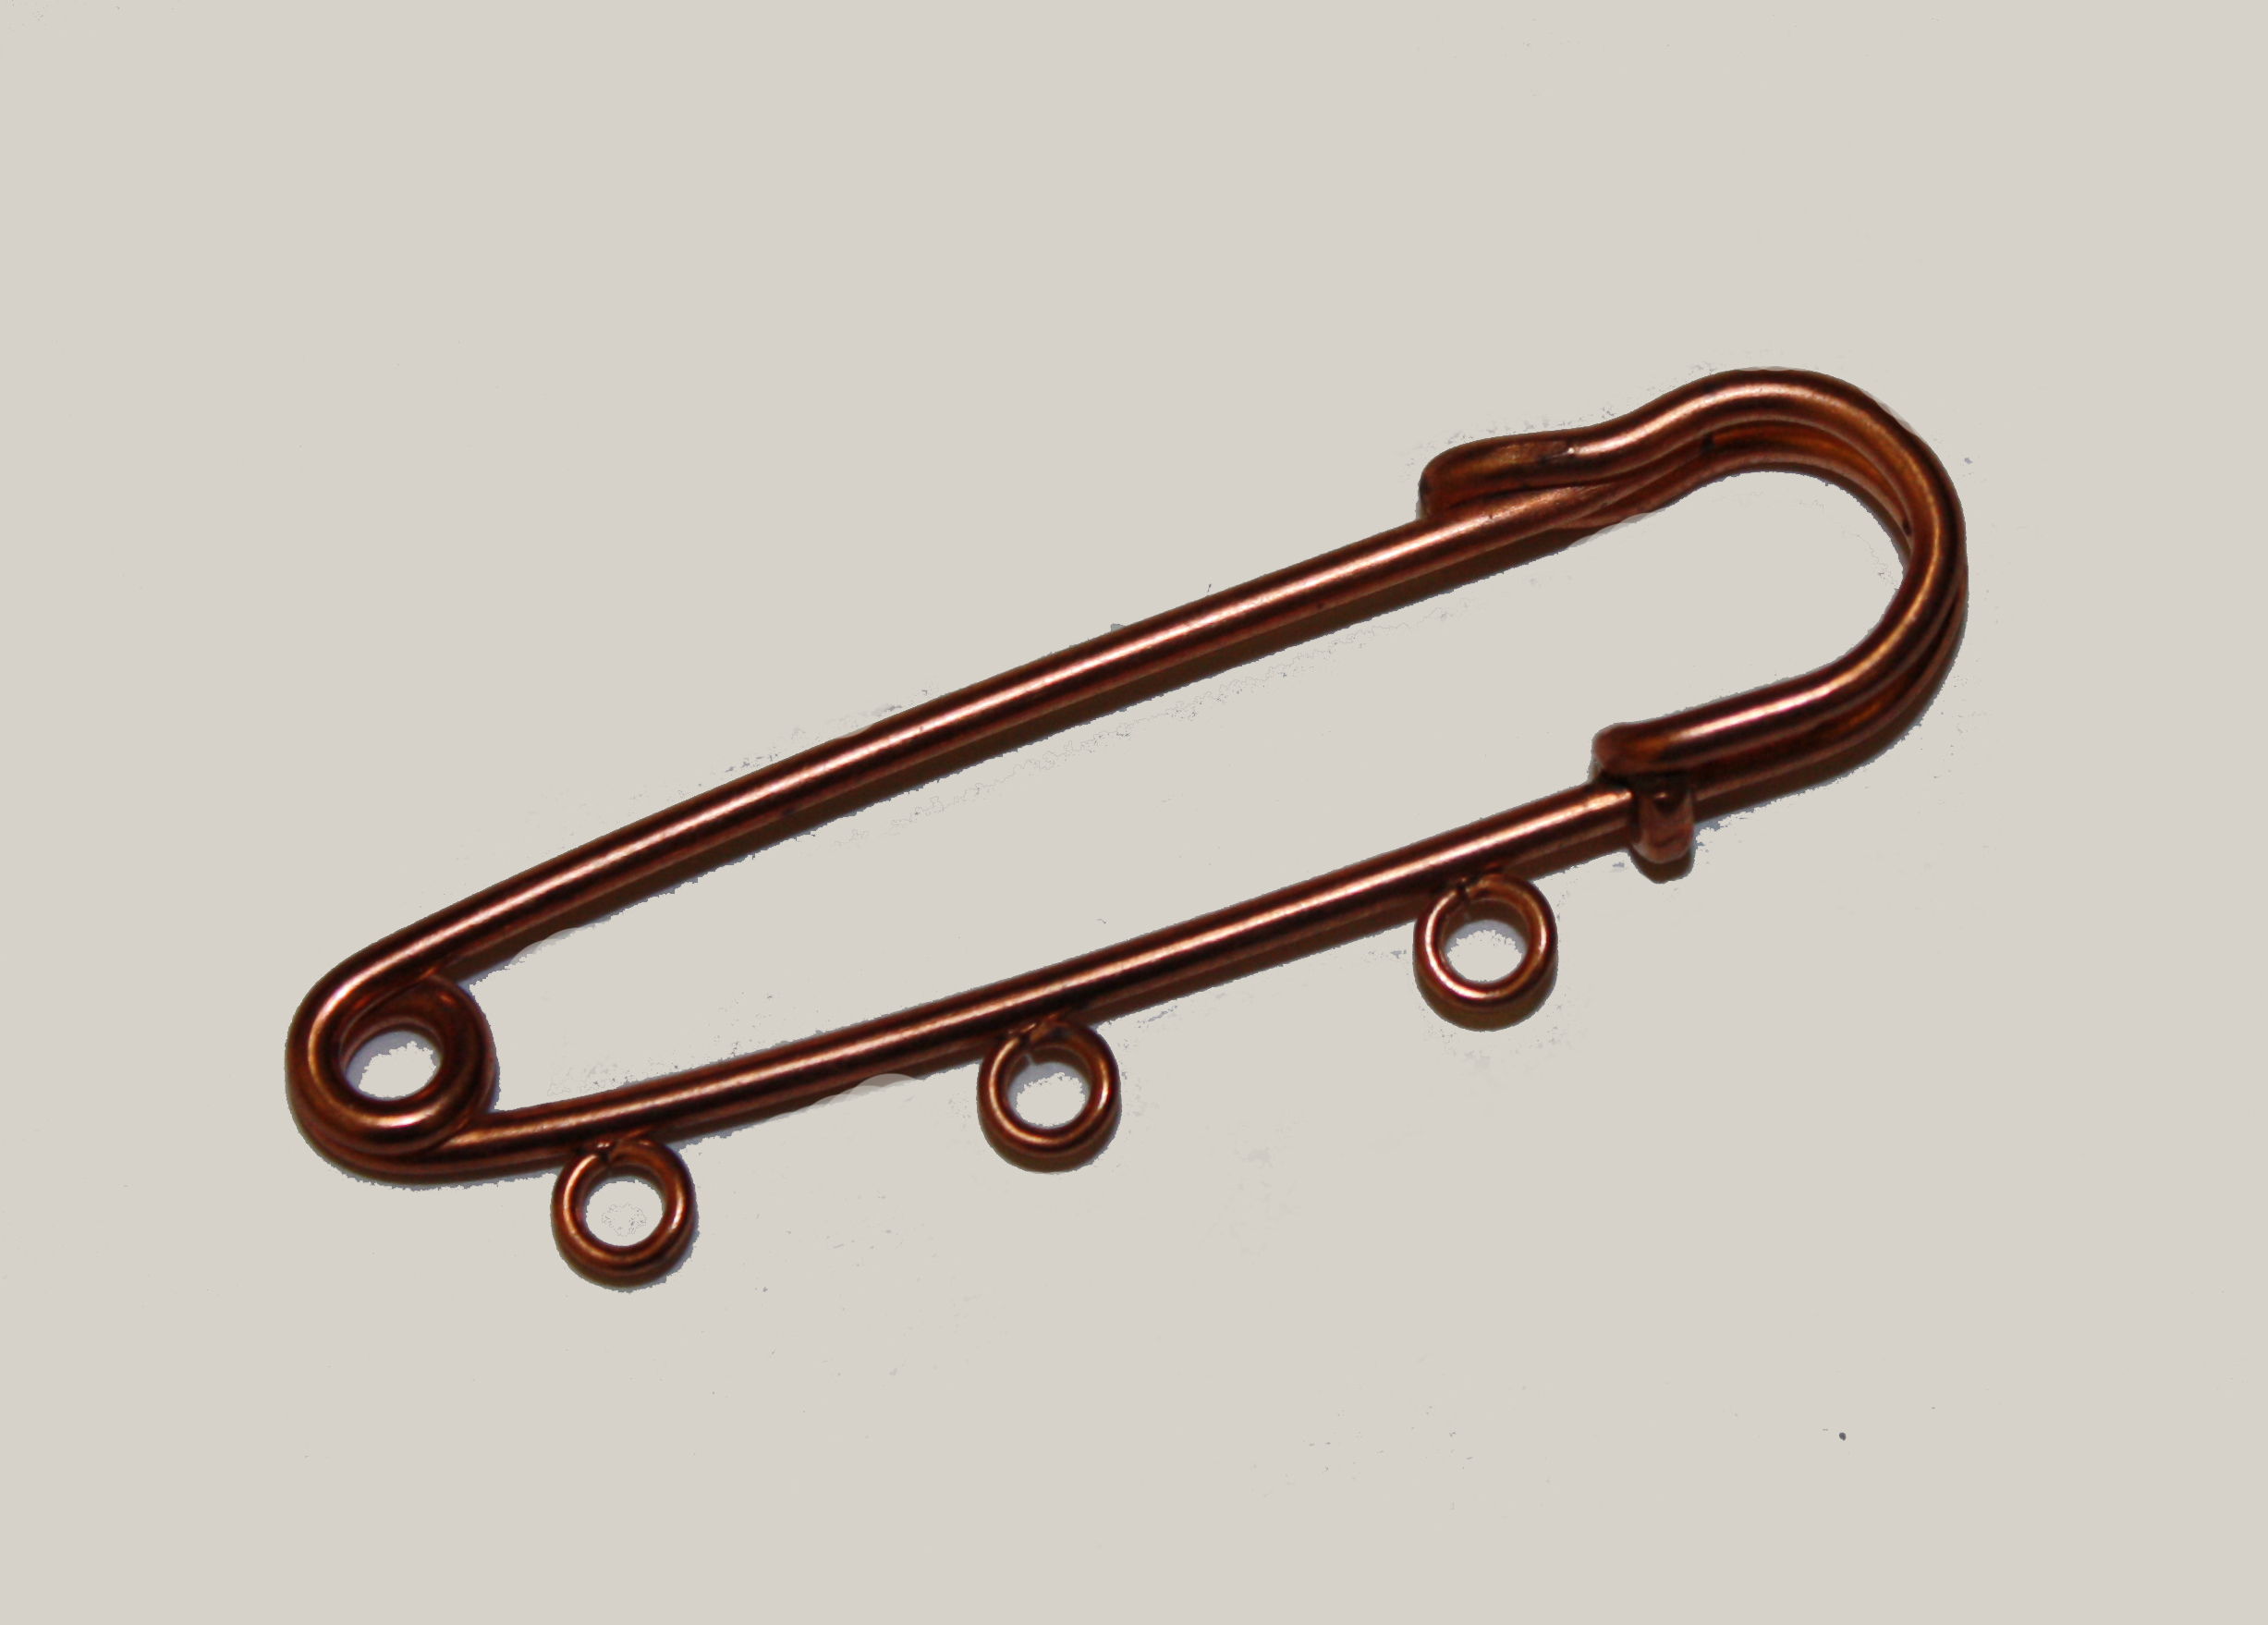 Kilt Pin 3 Loops 52mm - Copper Plated (1 per pack)